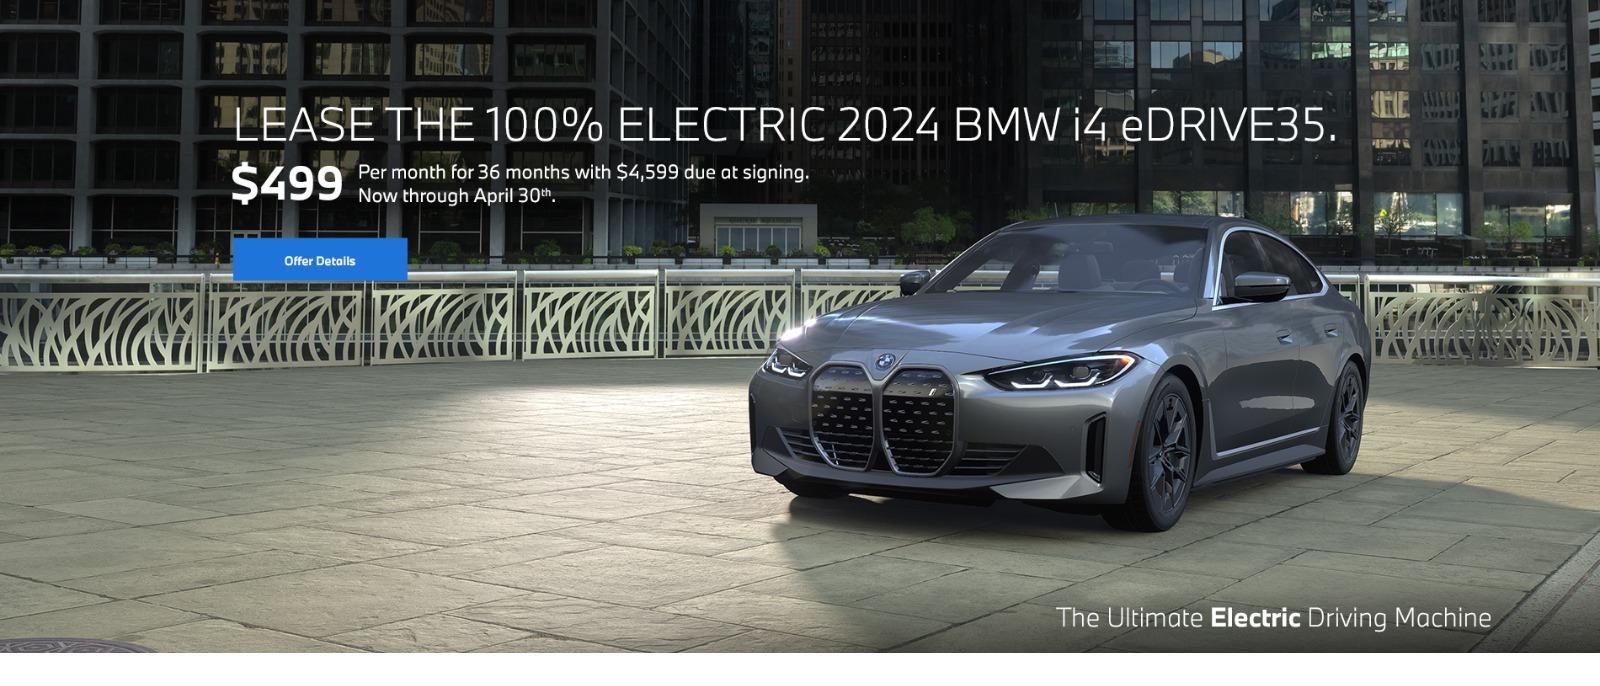 2024 BMW i4 eDrive35 lease for $499 per month for 36 months